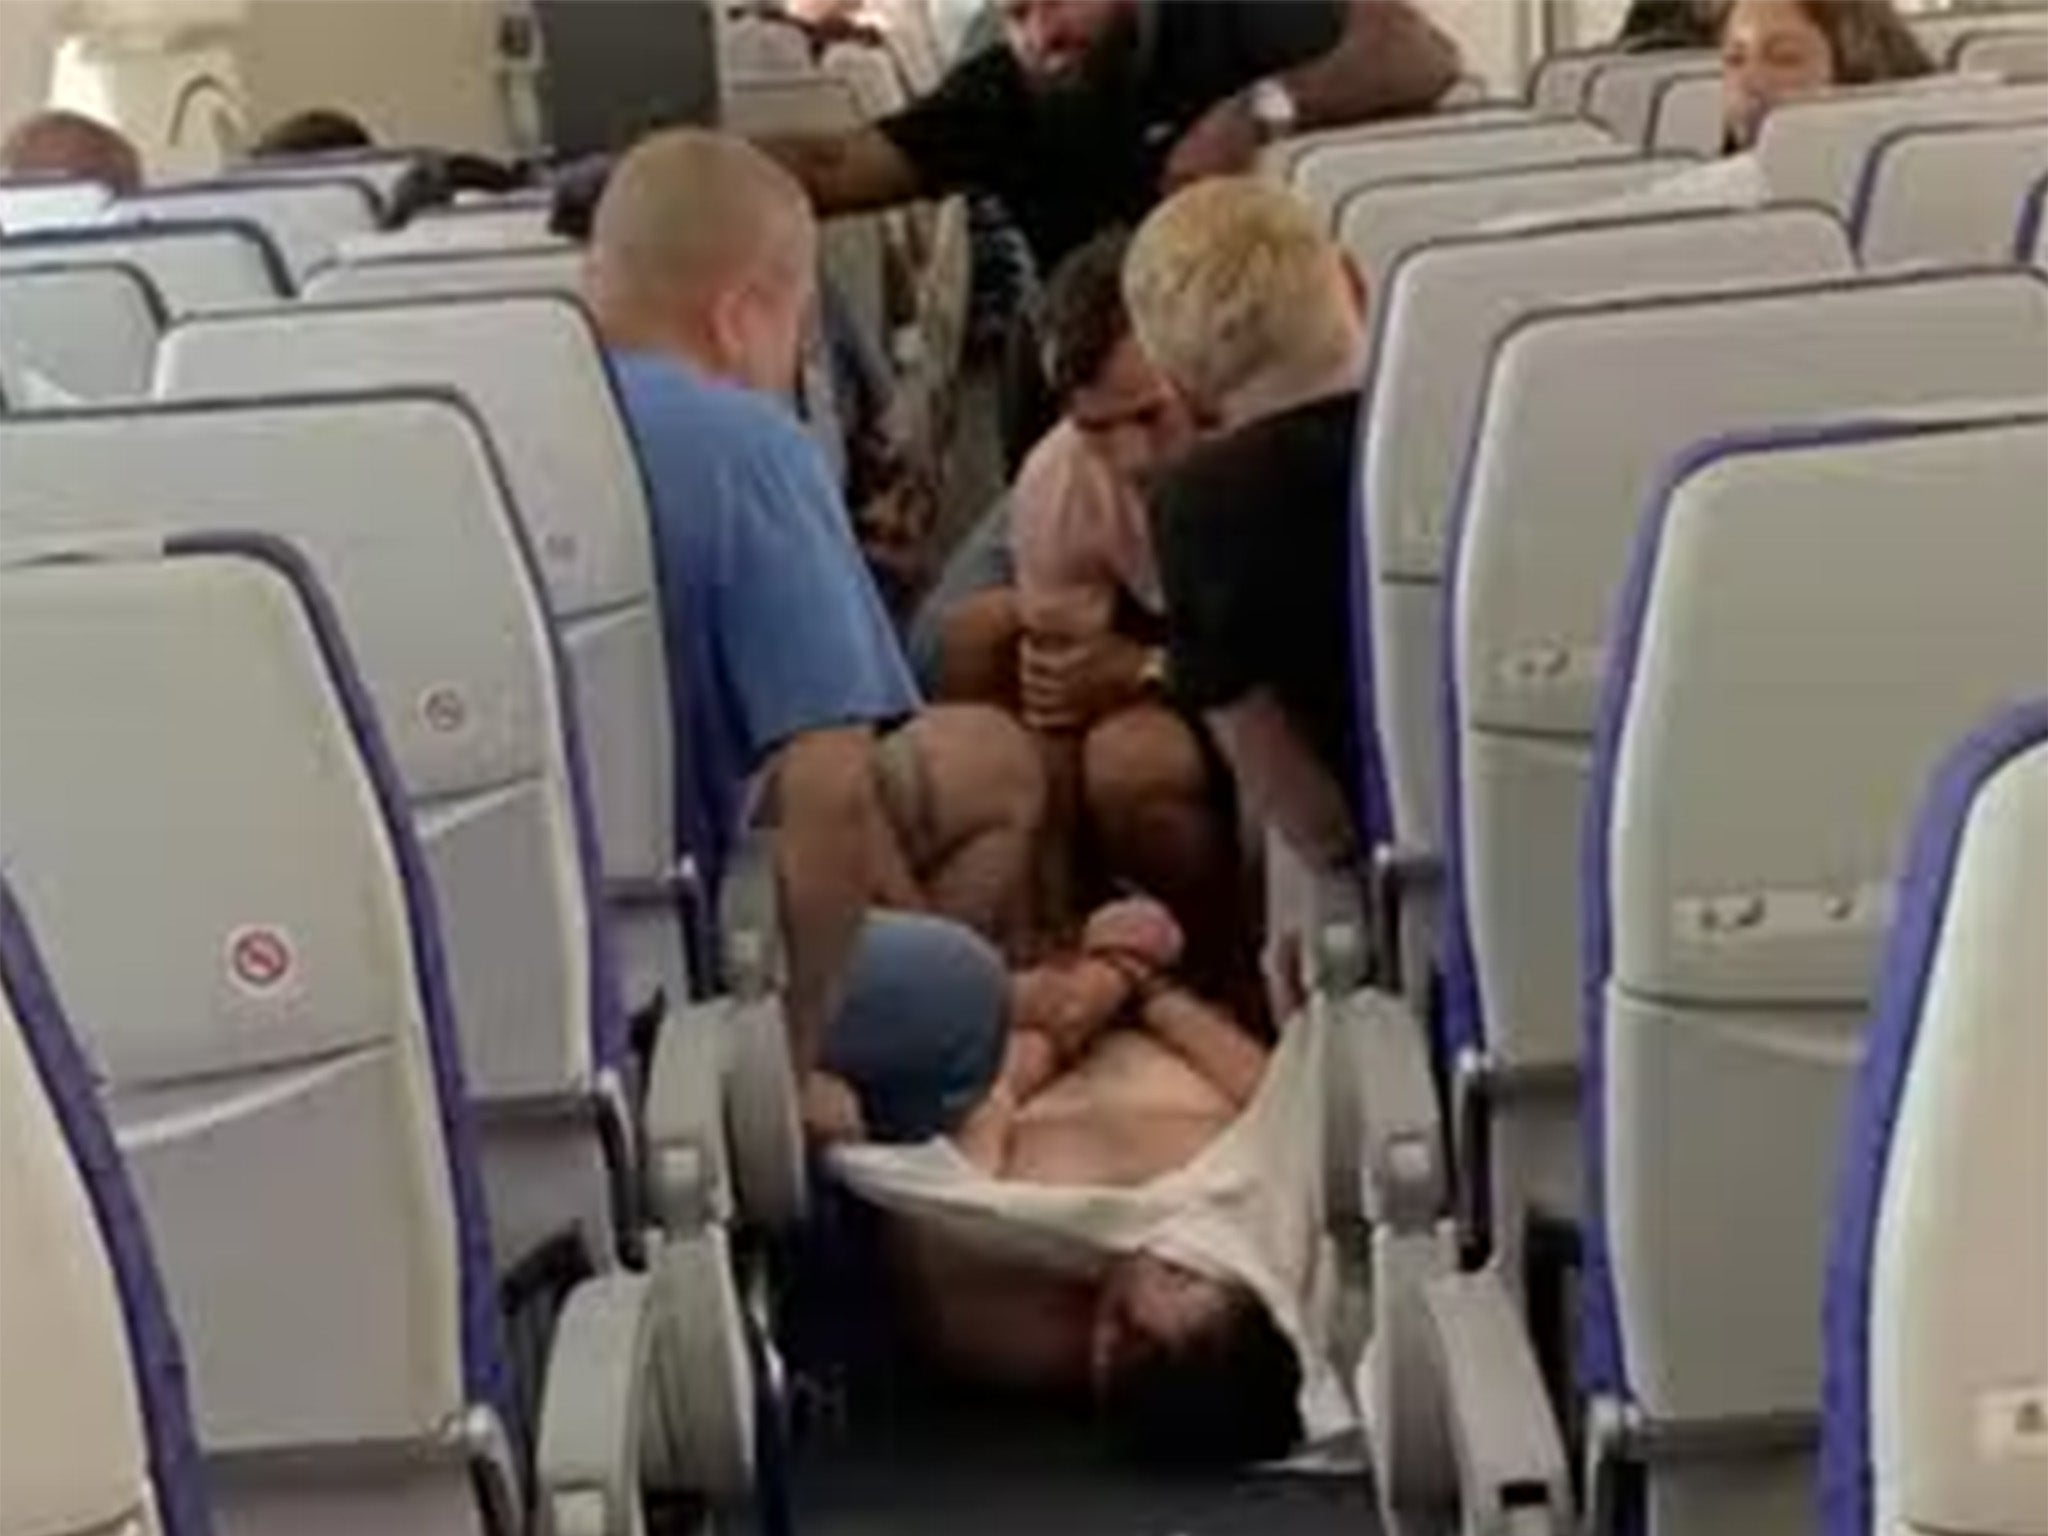 Airlines often find themselves having to divert to offload unruly passengers